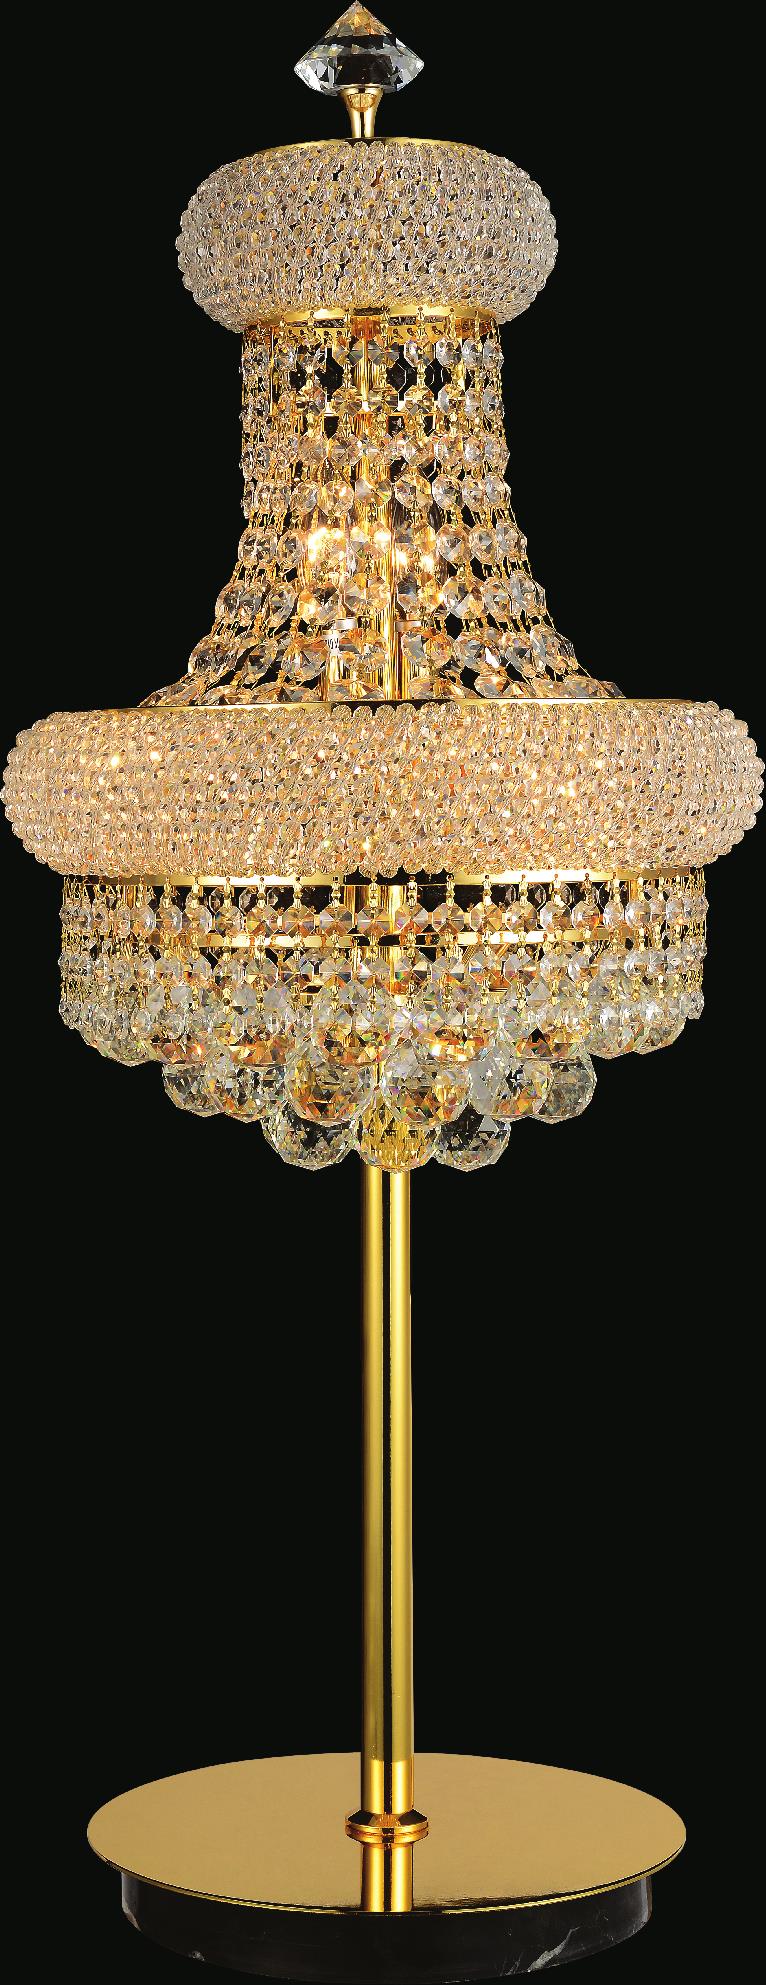 6 Light Table Lamp with Gold finish